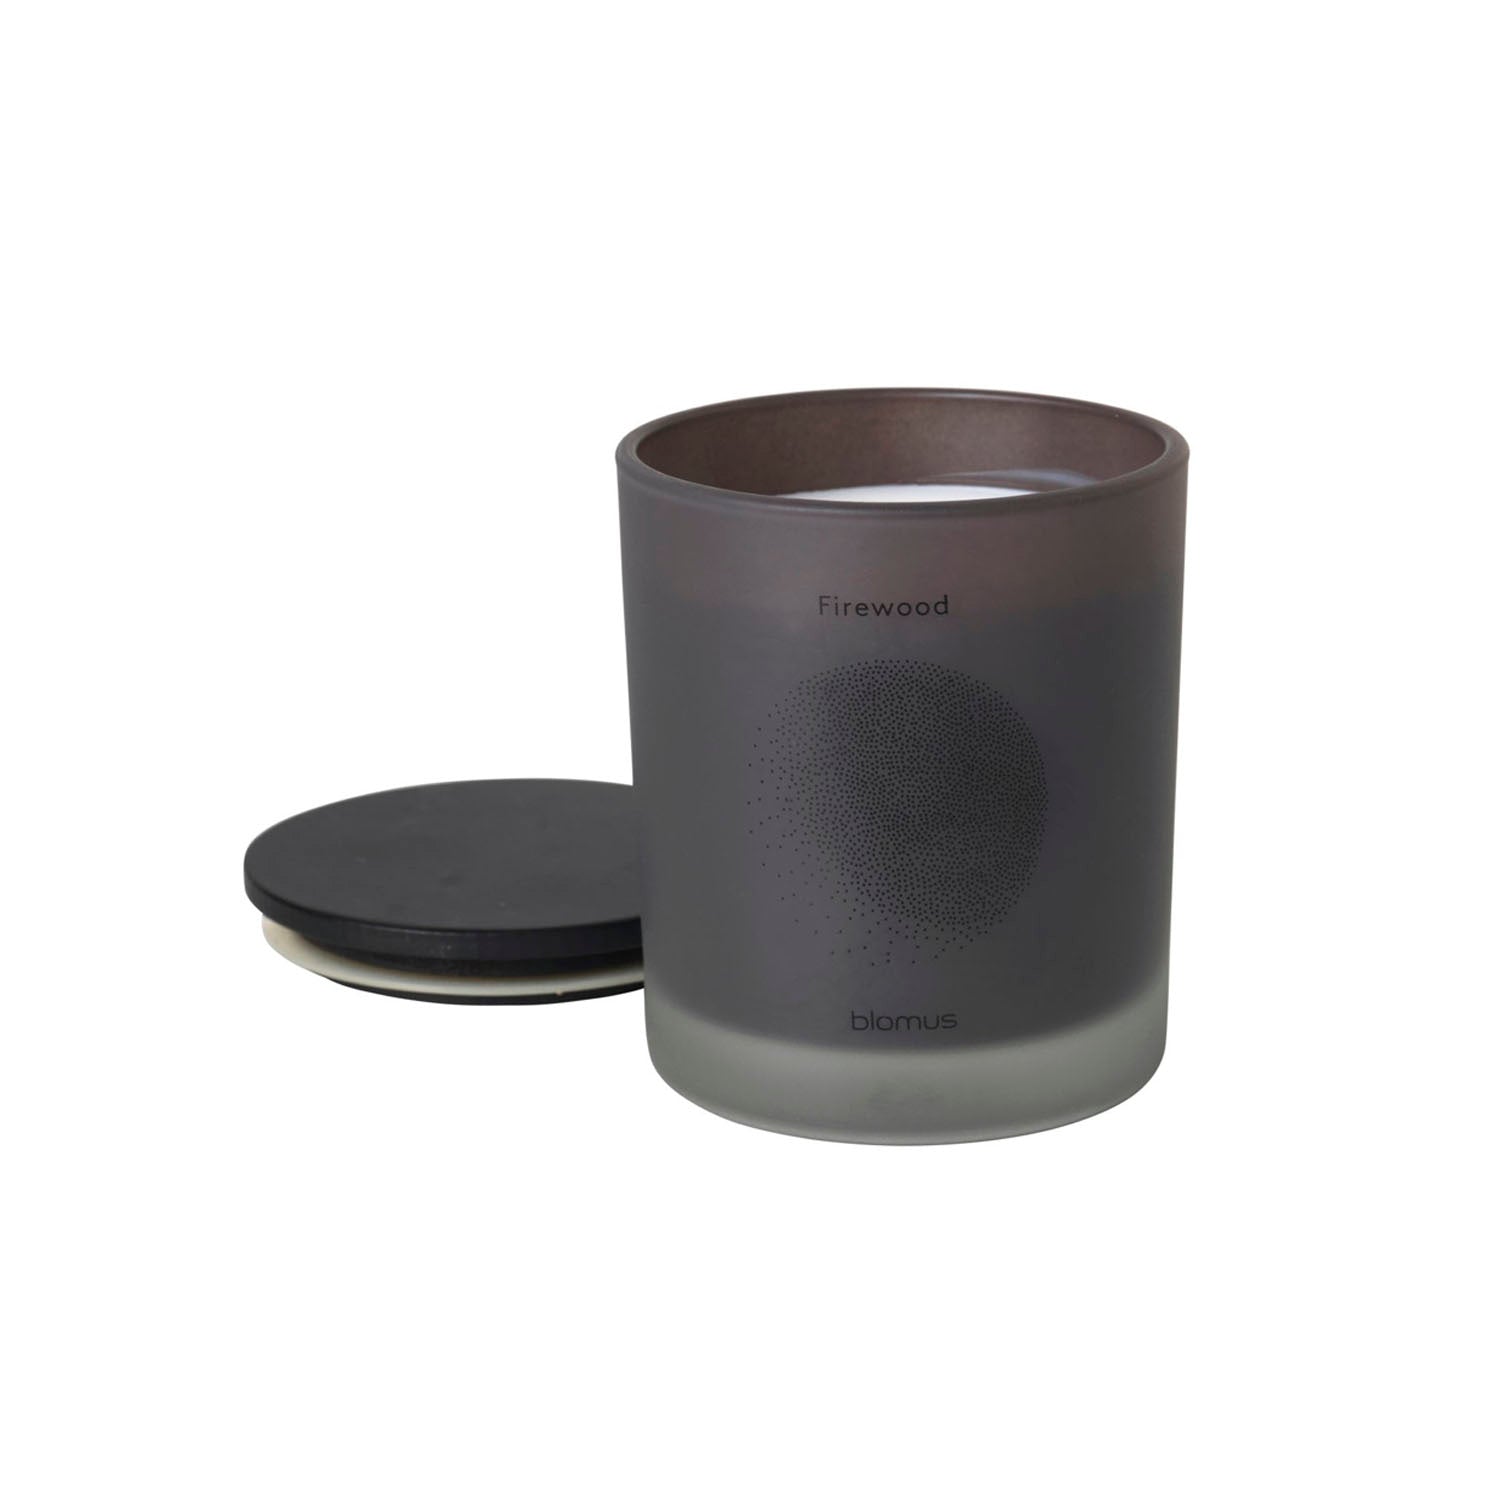 FLAVO PLOMA AROMATIC CANDLE